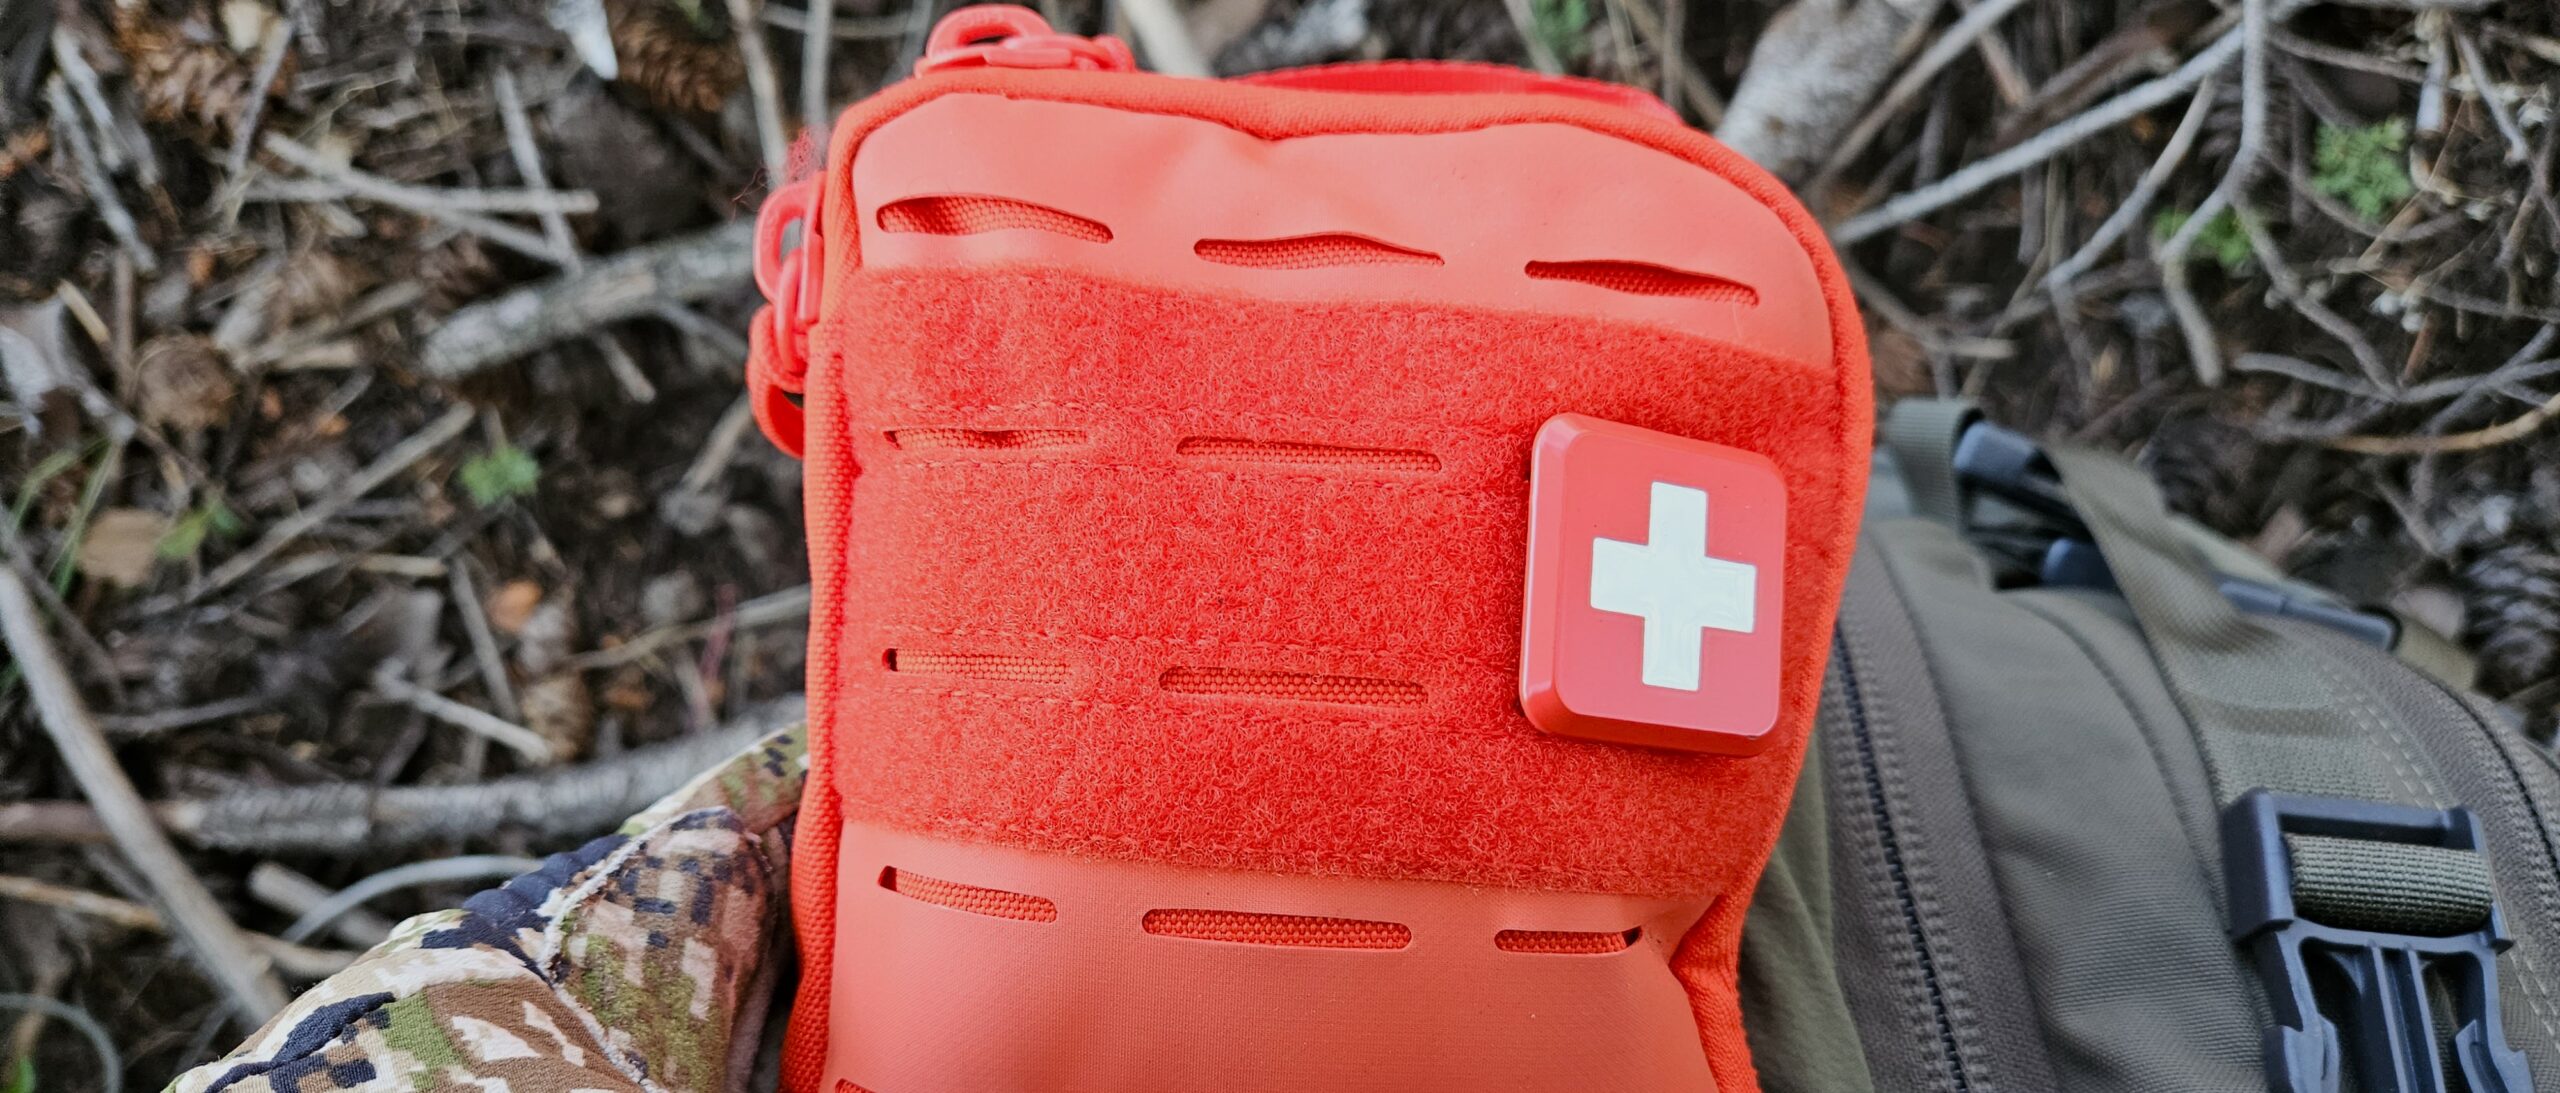 My Medic first aid kit. Best first aid kits for hunting, hiking, backpacking and your car. Hiking first aid kit.